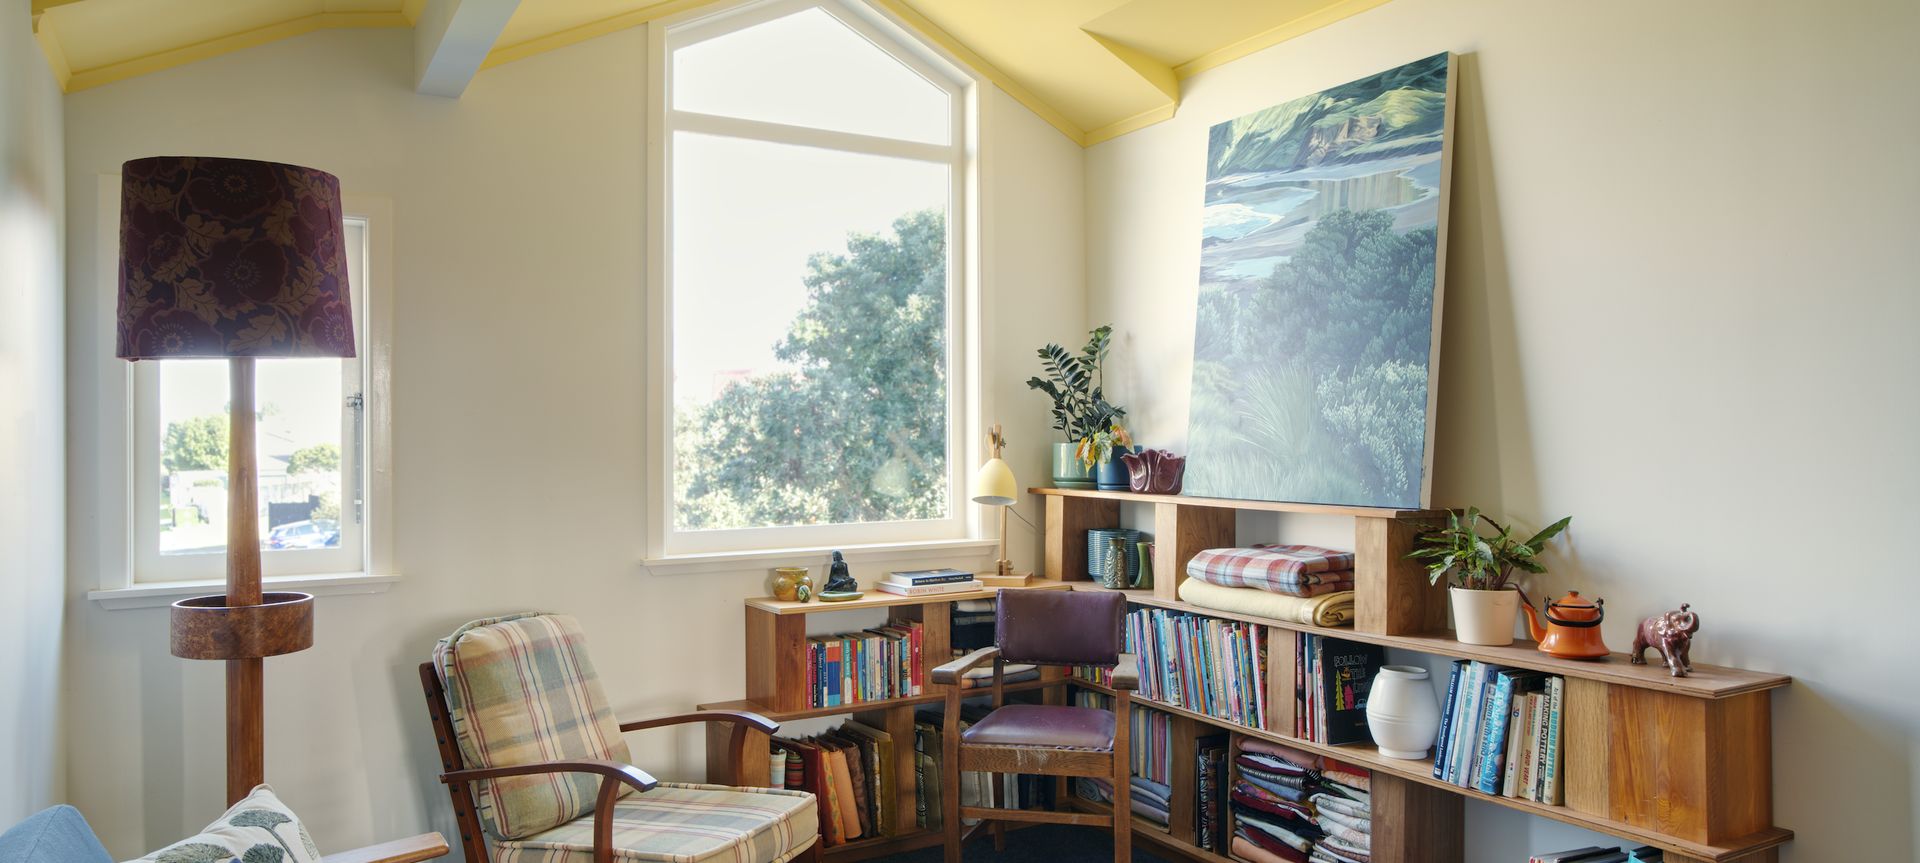 A relaxed and homely library space.